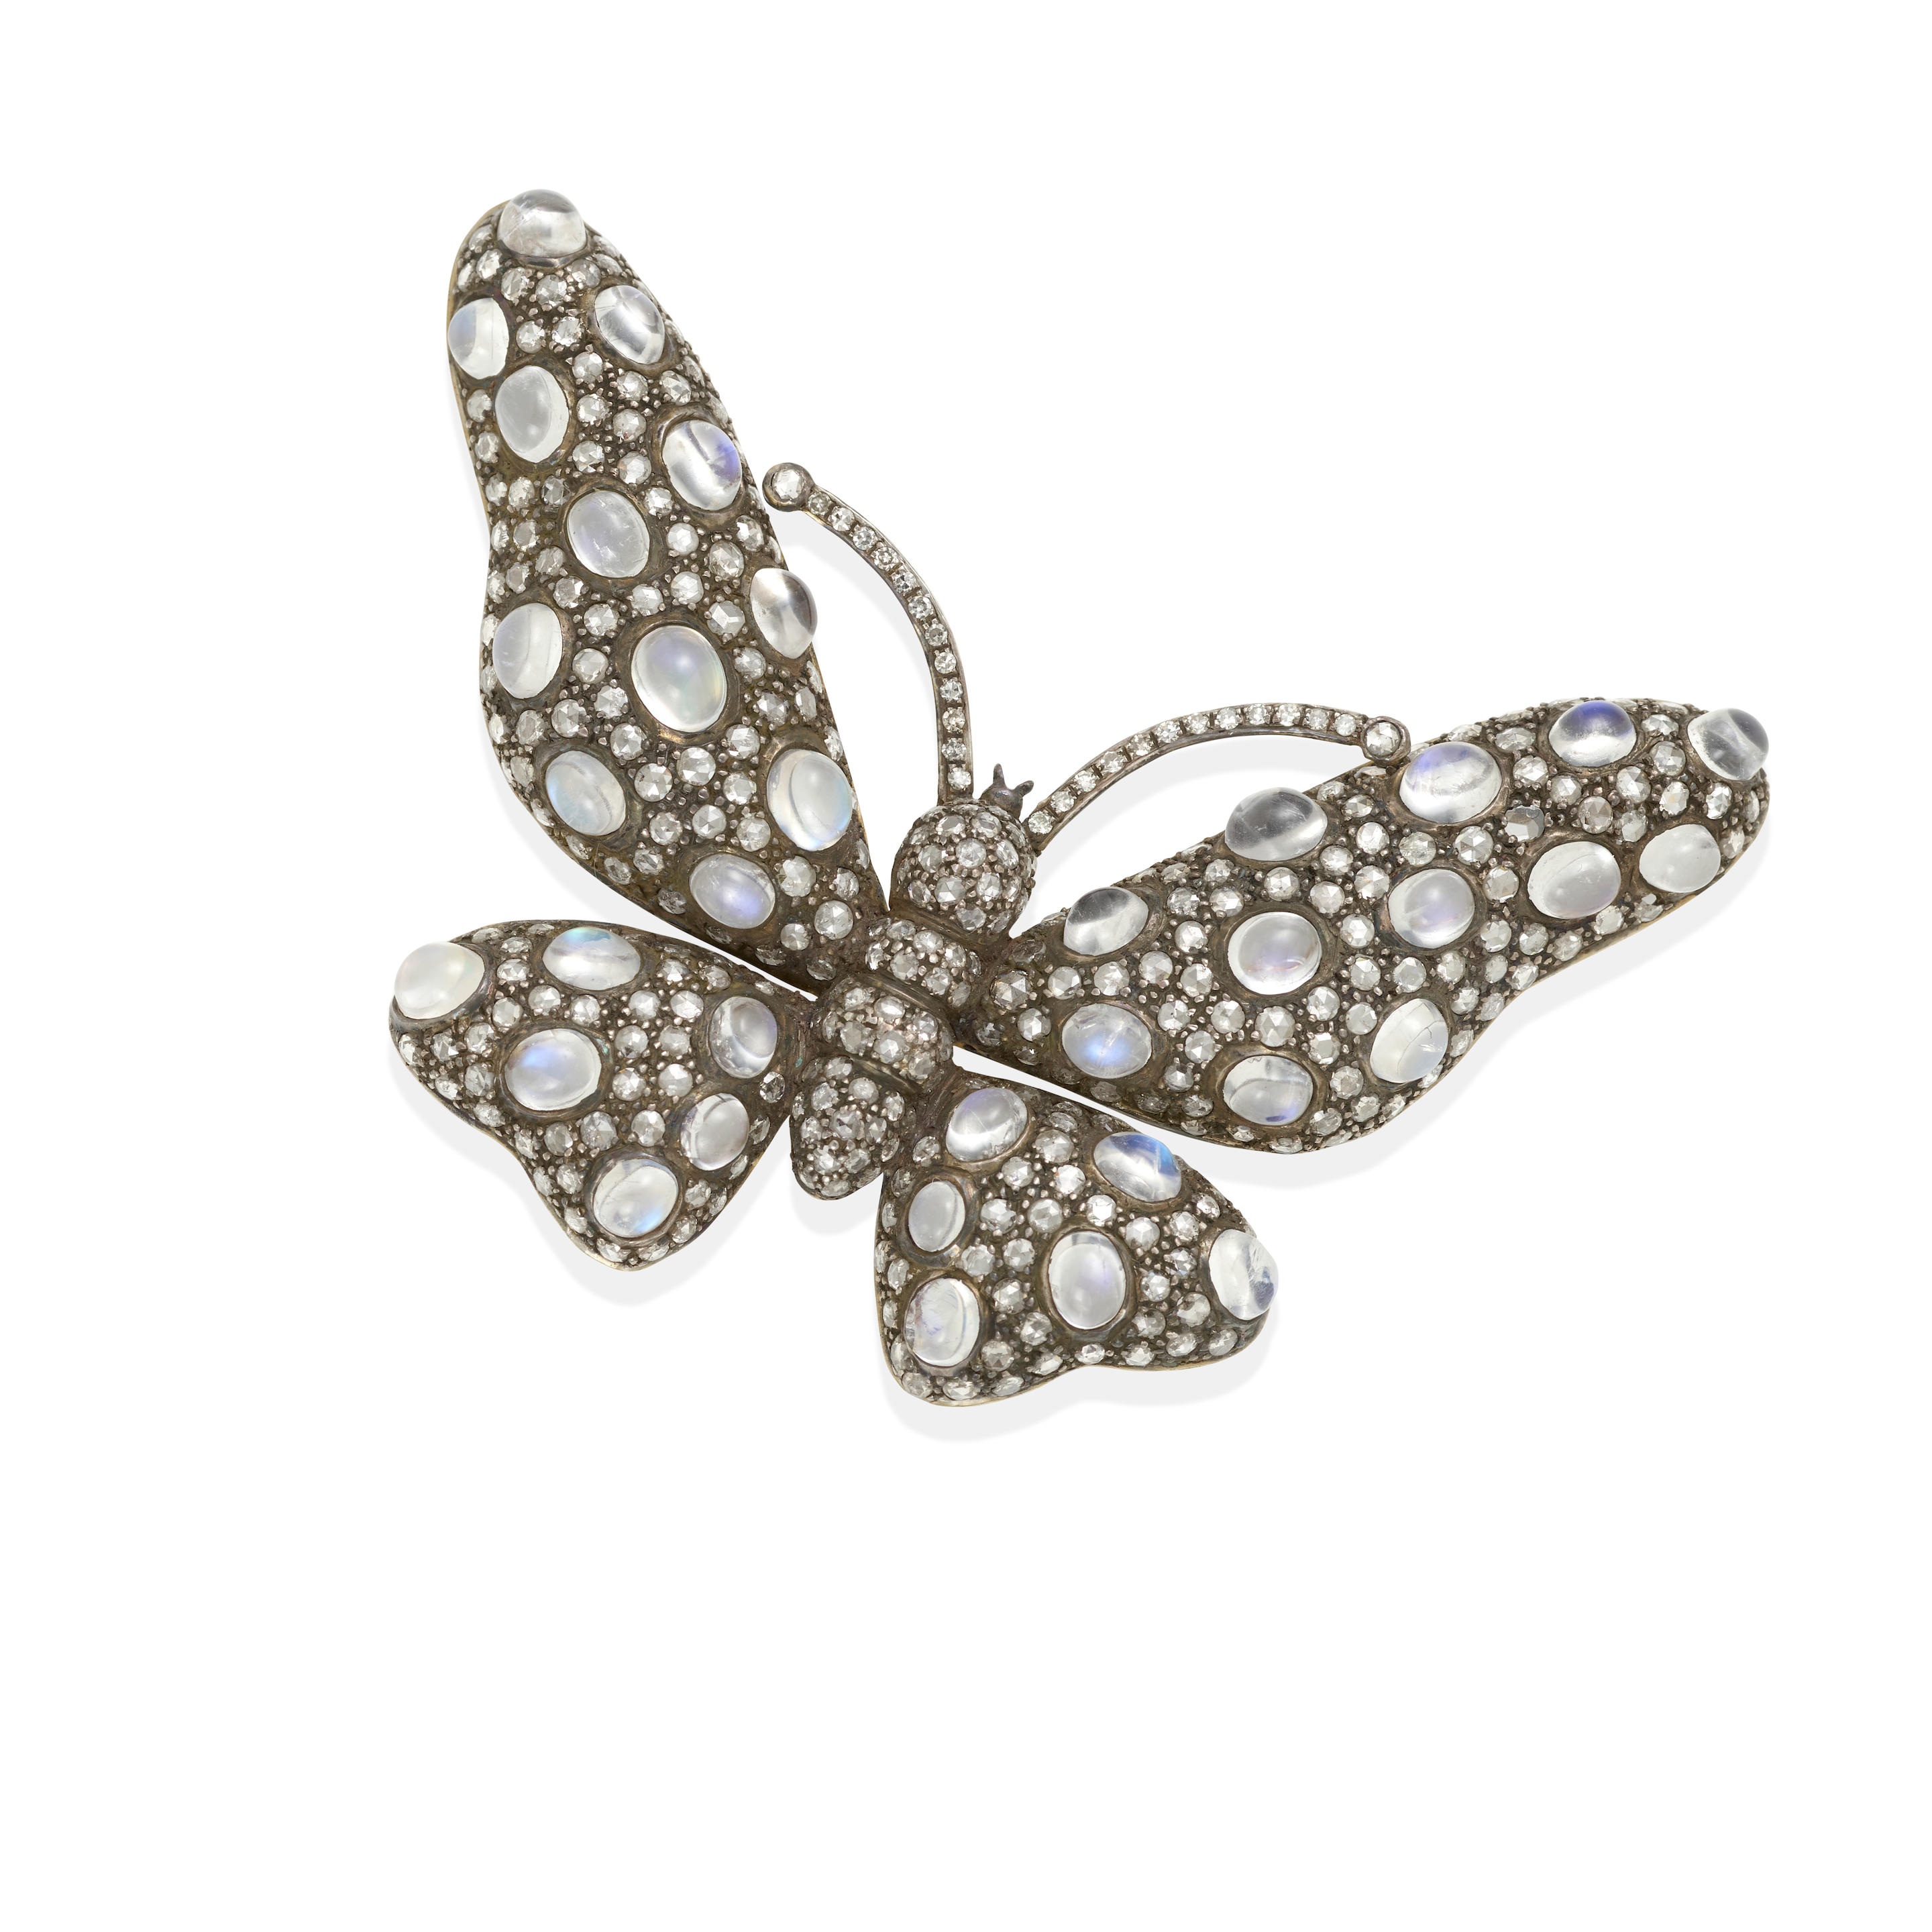 A STERLING SILVER, 14K GOLD, MOONSTONE AND DIAMOND BUTTERFLY BROOCH